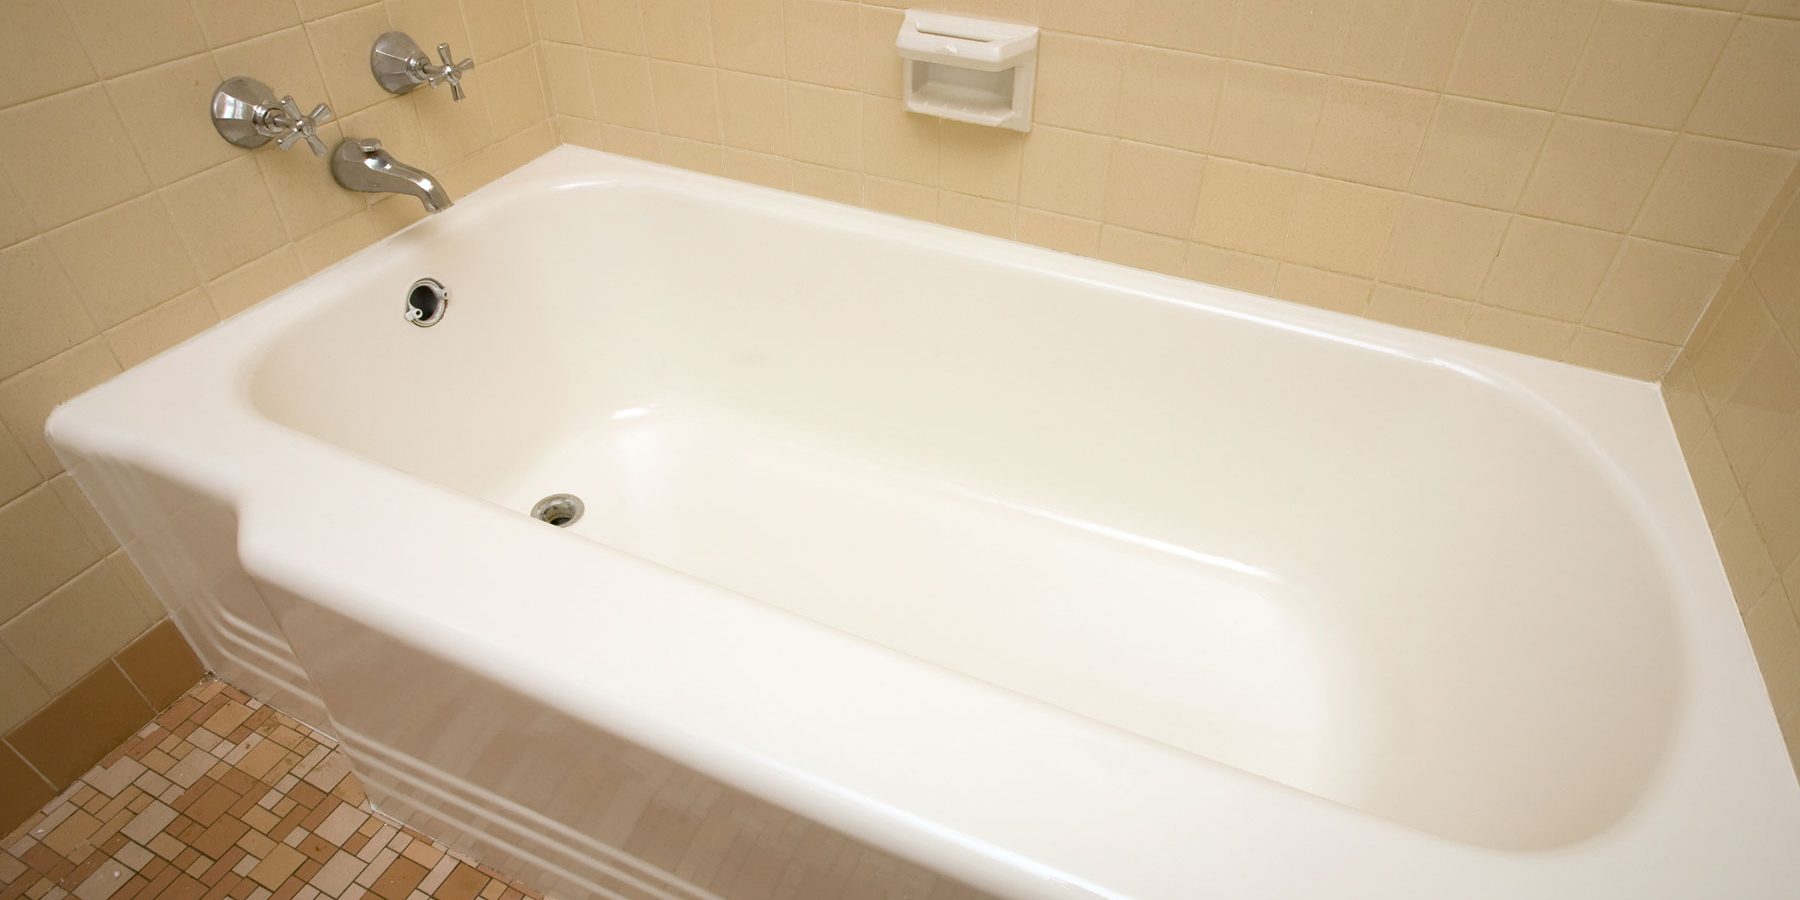 The Four Most Common Issues That Arise With Tub Resurfacing